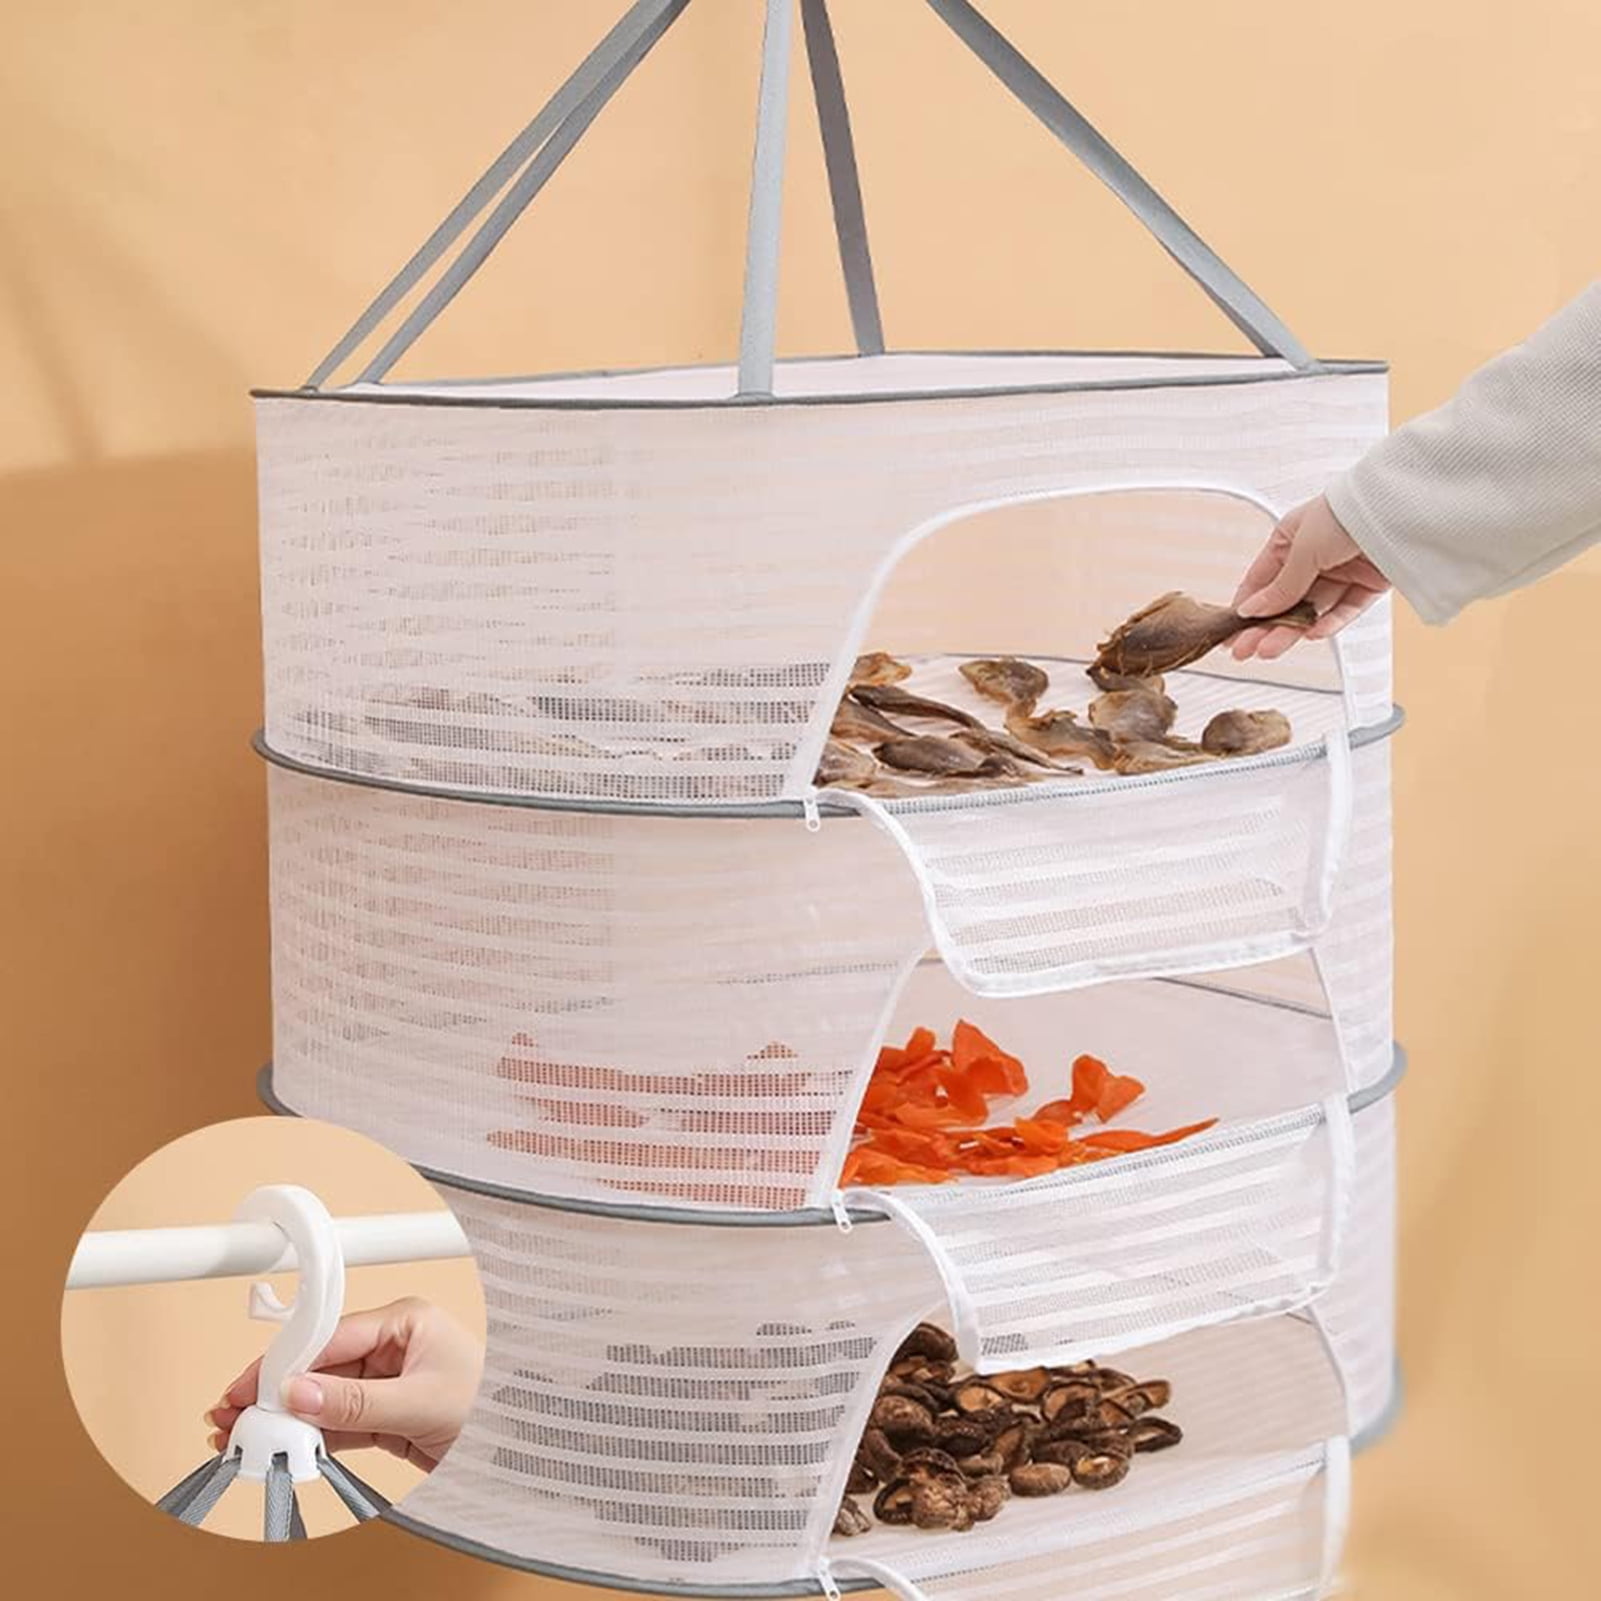 Pnellth 1/2/3 Layer Hanging Mesh Drying Basket U-shaped Zipper Design Food  Fish Clothes Hanging Drying Net Outdoor Foldable Hanging Mesh Dryer